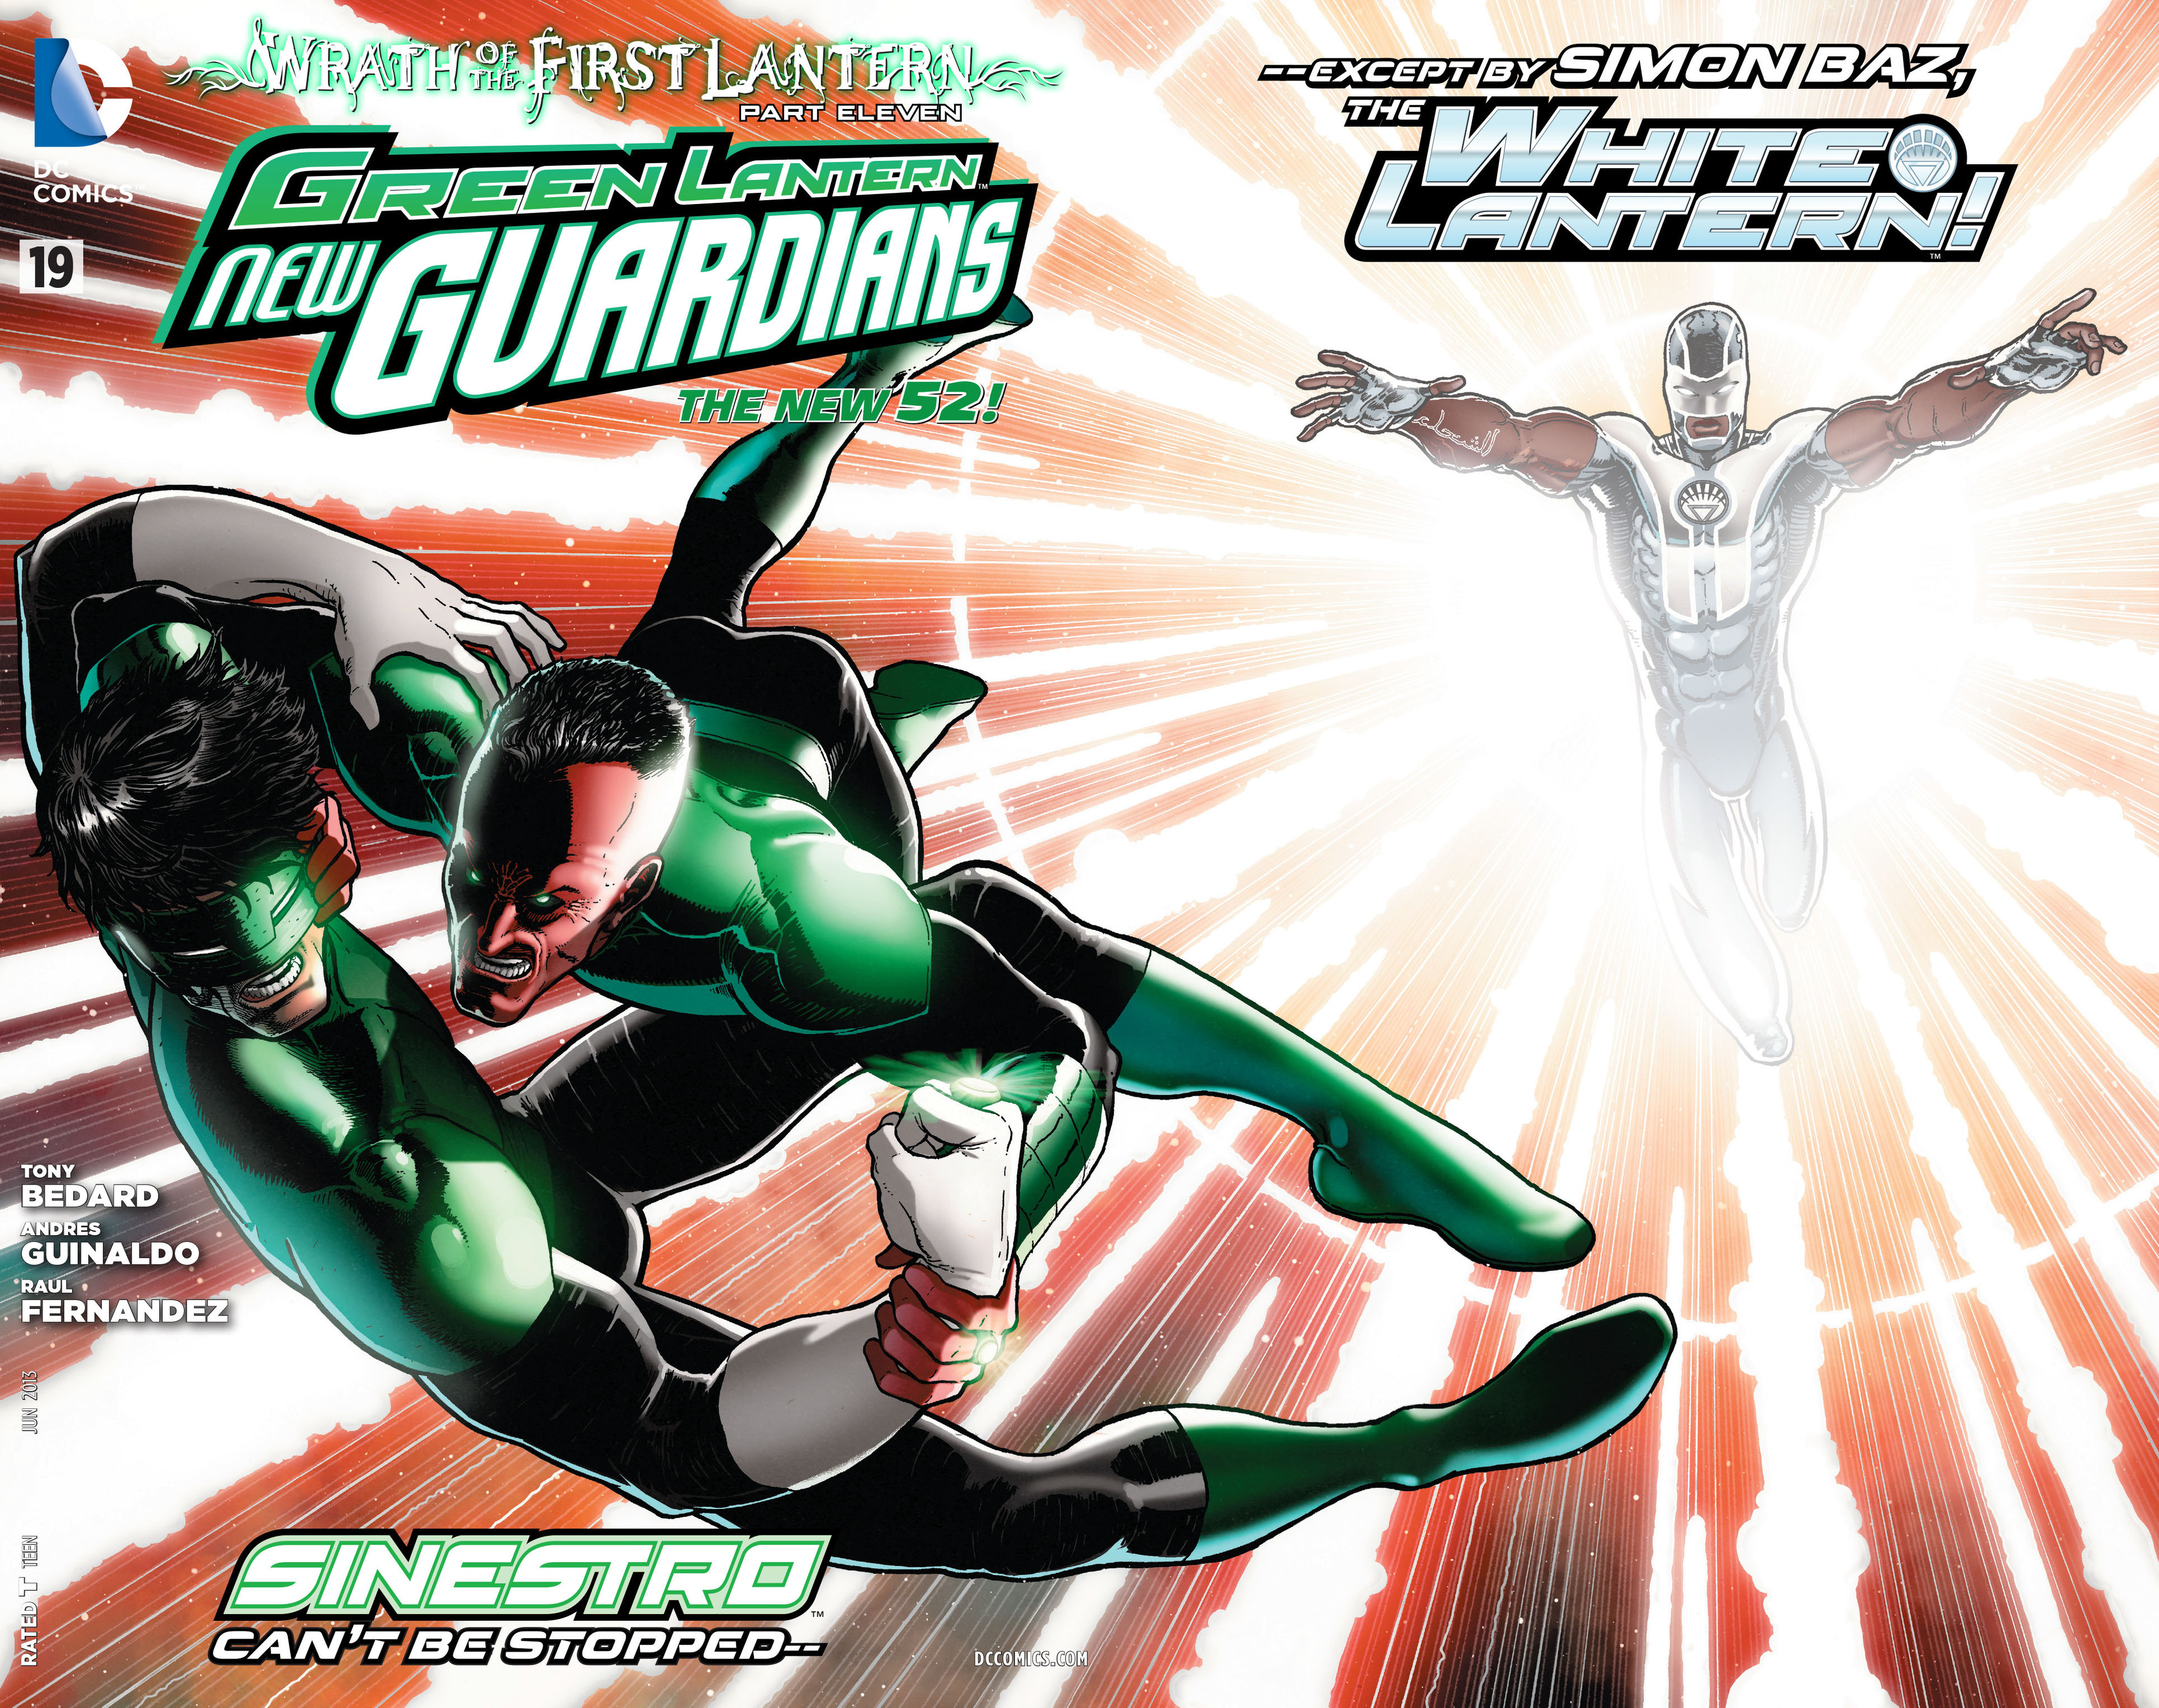 Tip: Click on the Green Lantern: New Guardians 19 comic image to go to the ...